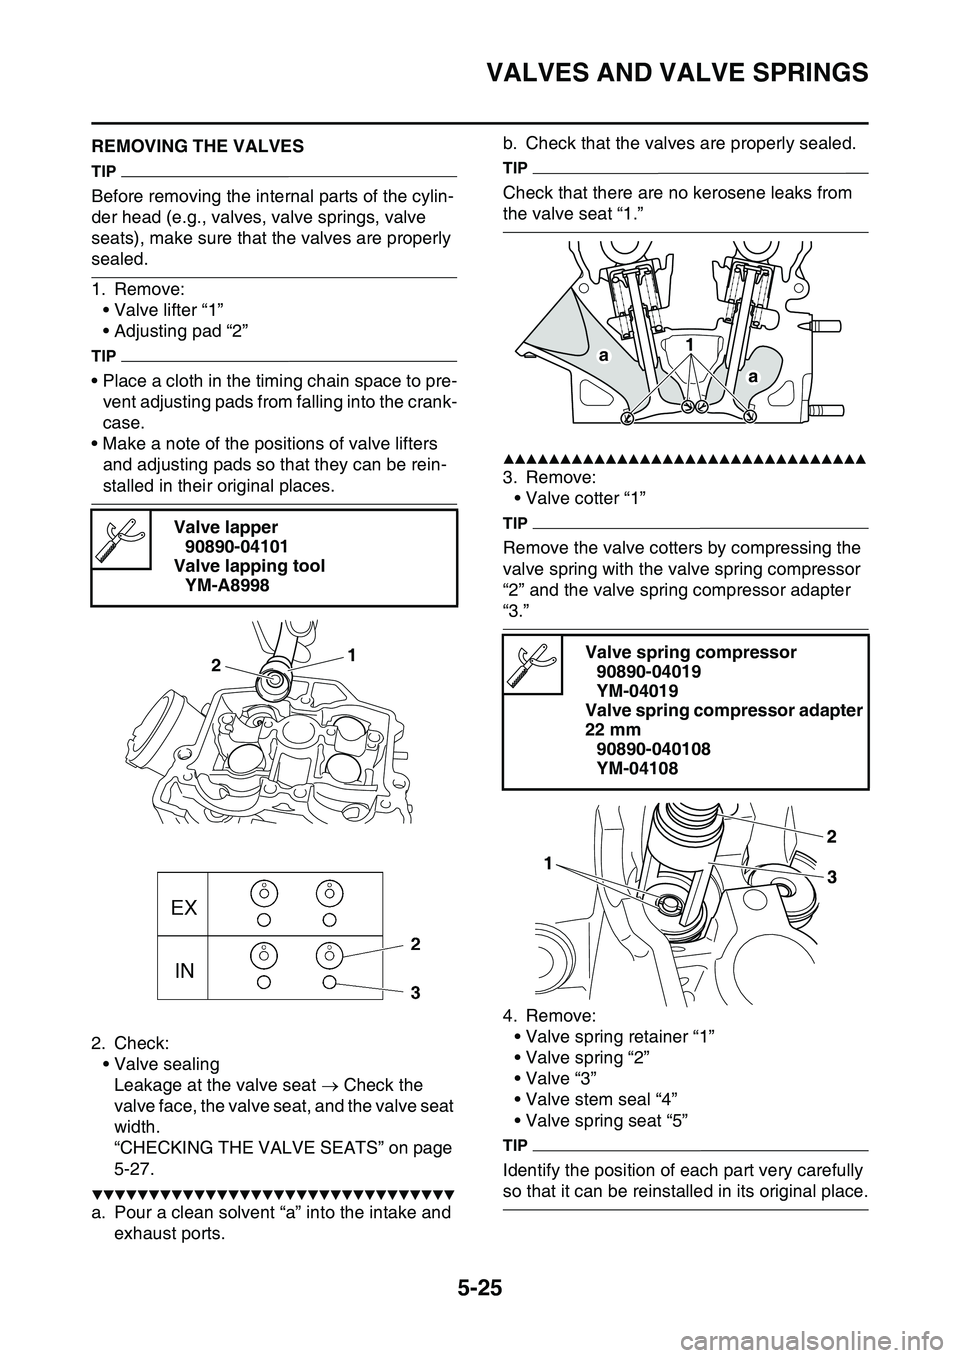 YAMAHA YZ450F 2014  Owners Manual VALVES AND VALVE SPRINGS
5-25
EAS1SL1220REMOVING THE VALVES
TIP
Before removing the internal parts of the cylin-
der head (e.g., valves, valve springs, valve 
seats), make sure that the valves are pro